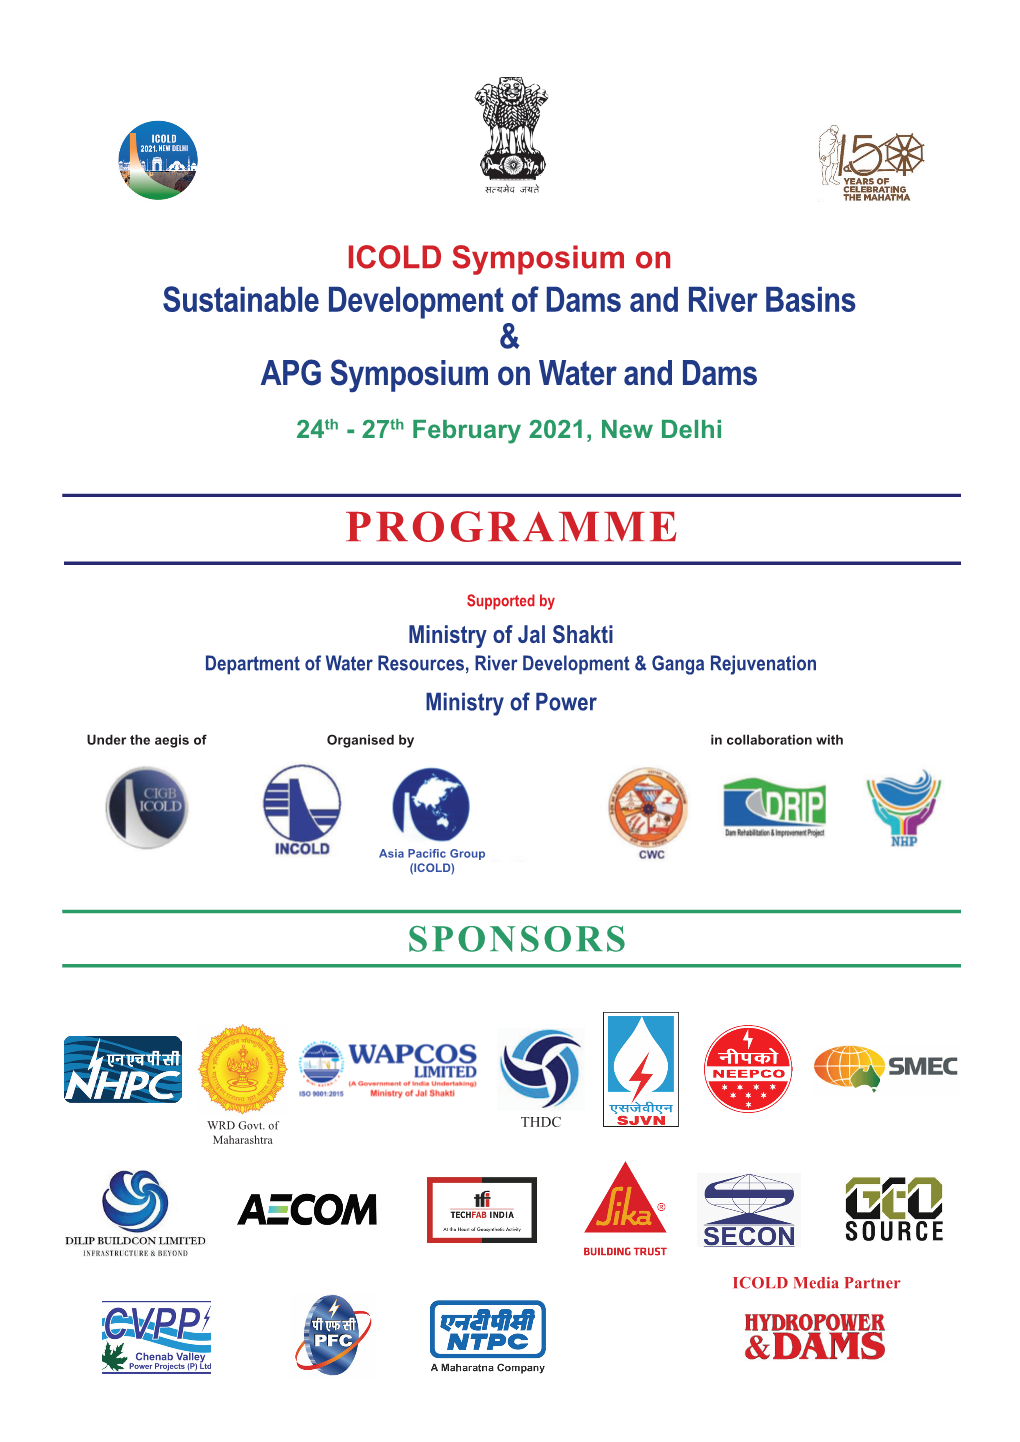 Sustainable Development of Dams and River Basins & APG Symposium on Water and Dams